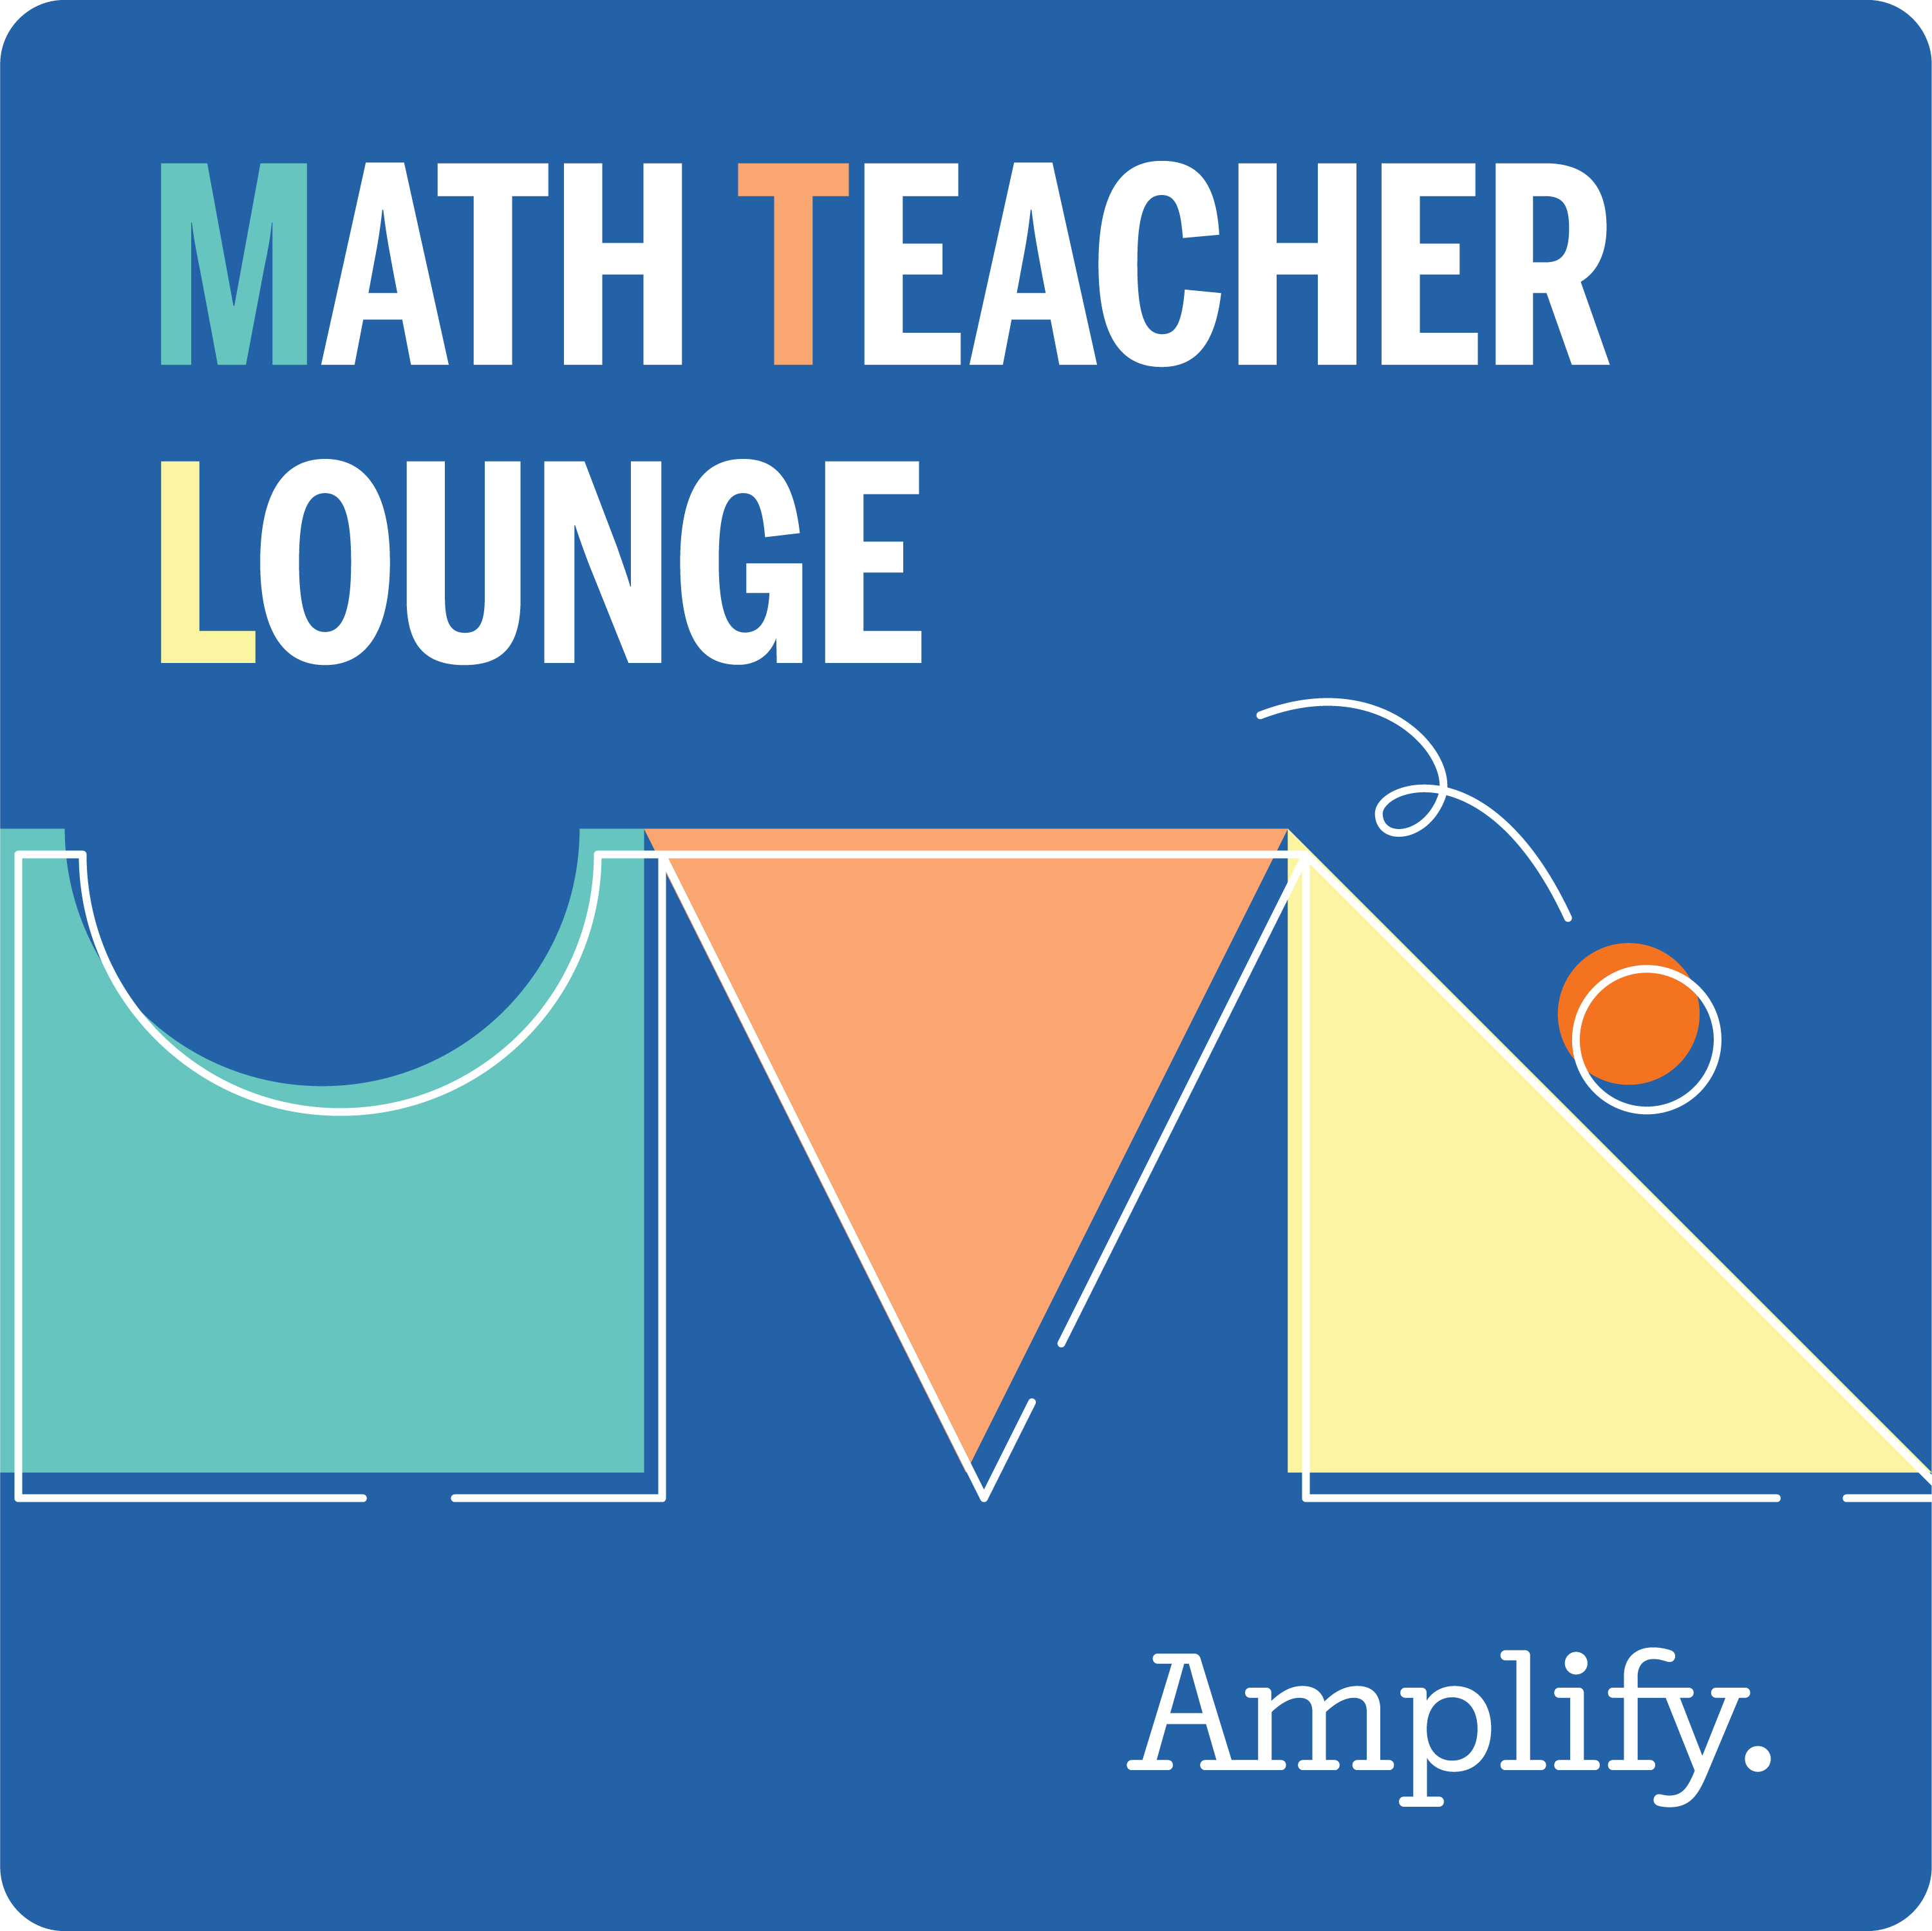 Math Teacher Lounge cover image with three shapes